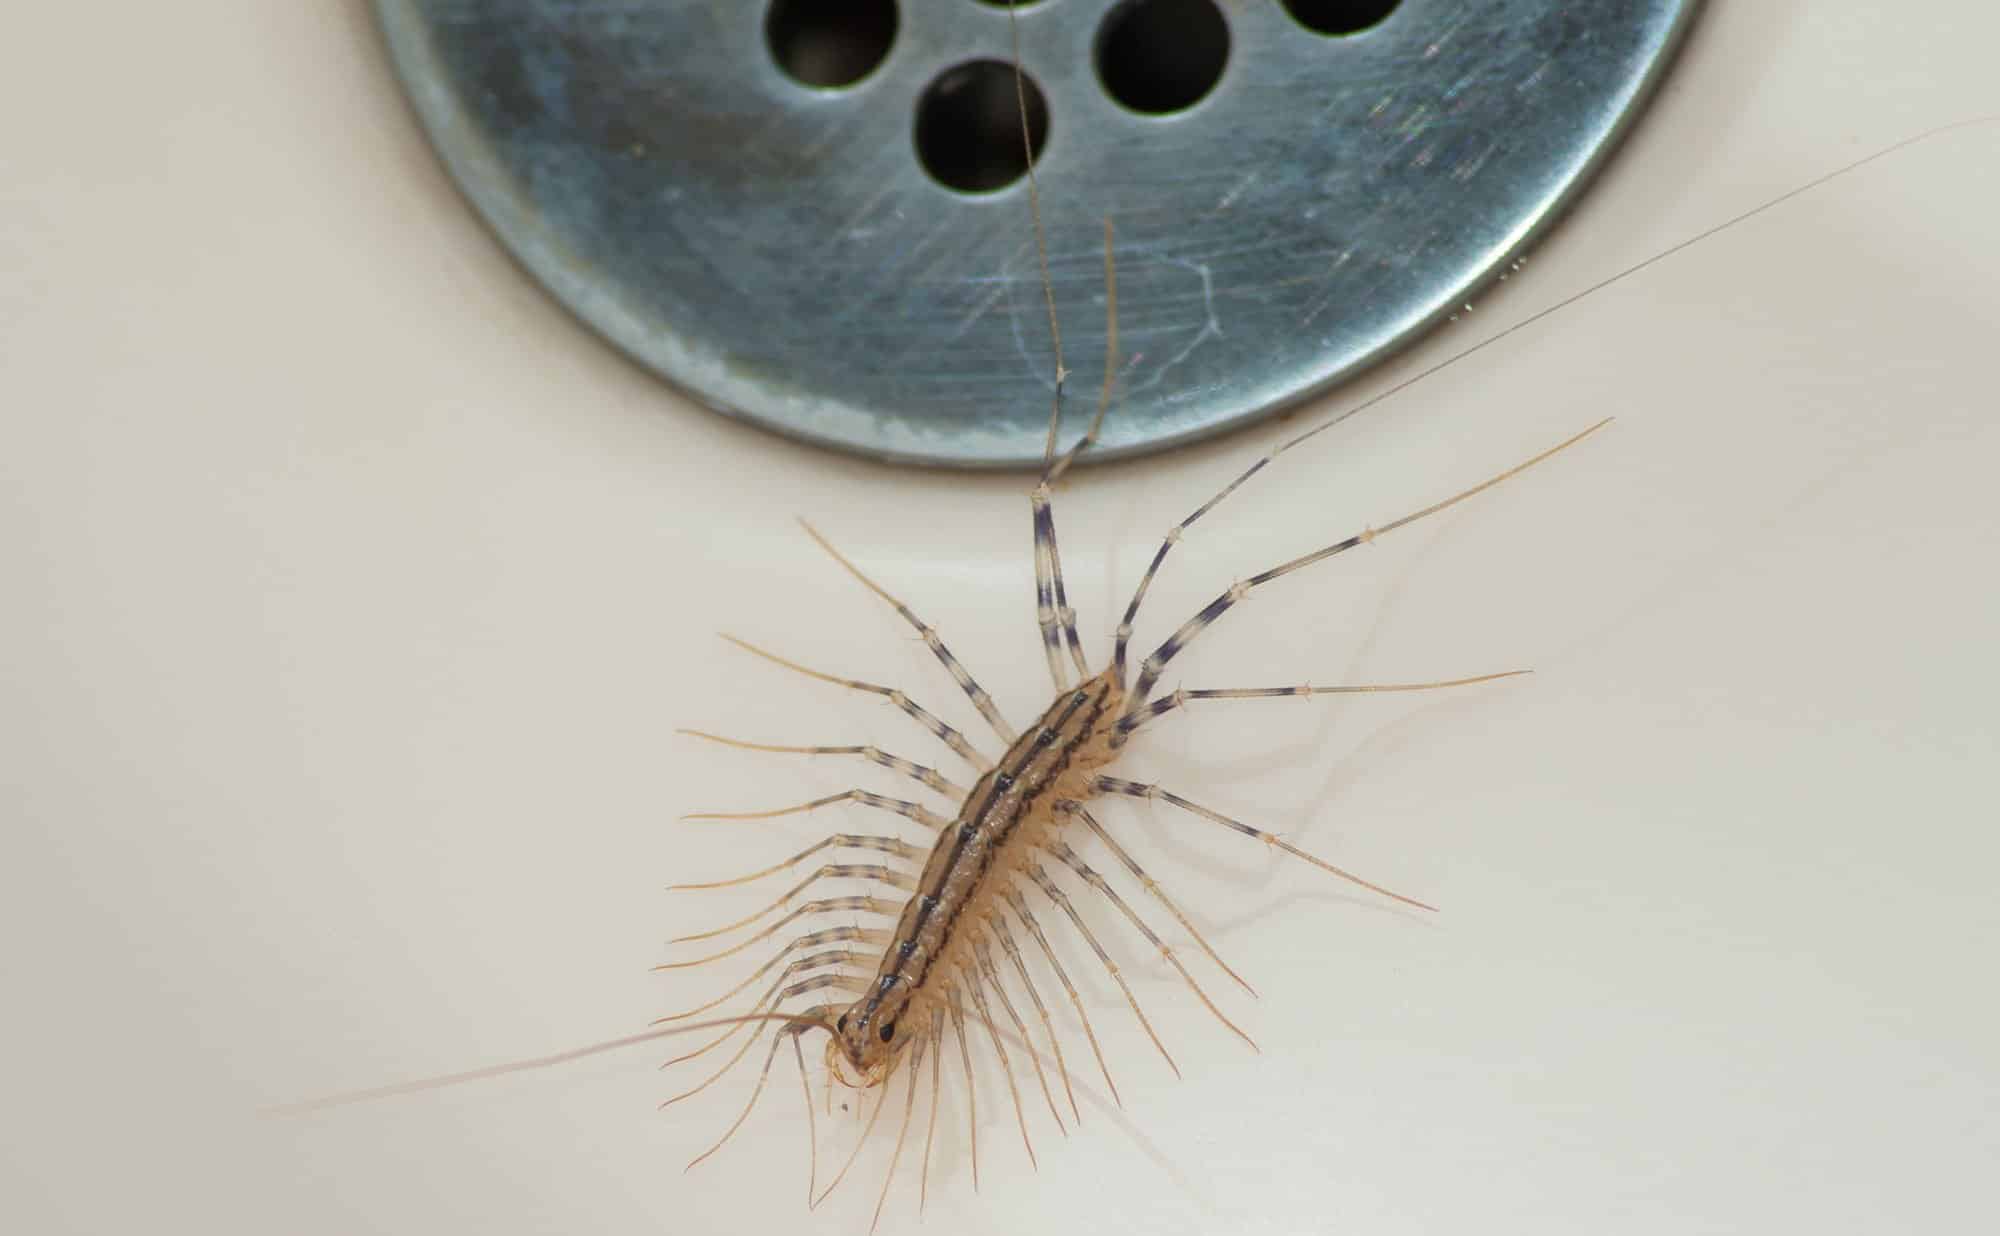 Centipede Pest Control: How to Get Rid of Centipedes in Minneapolis